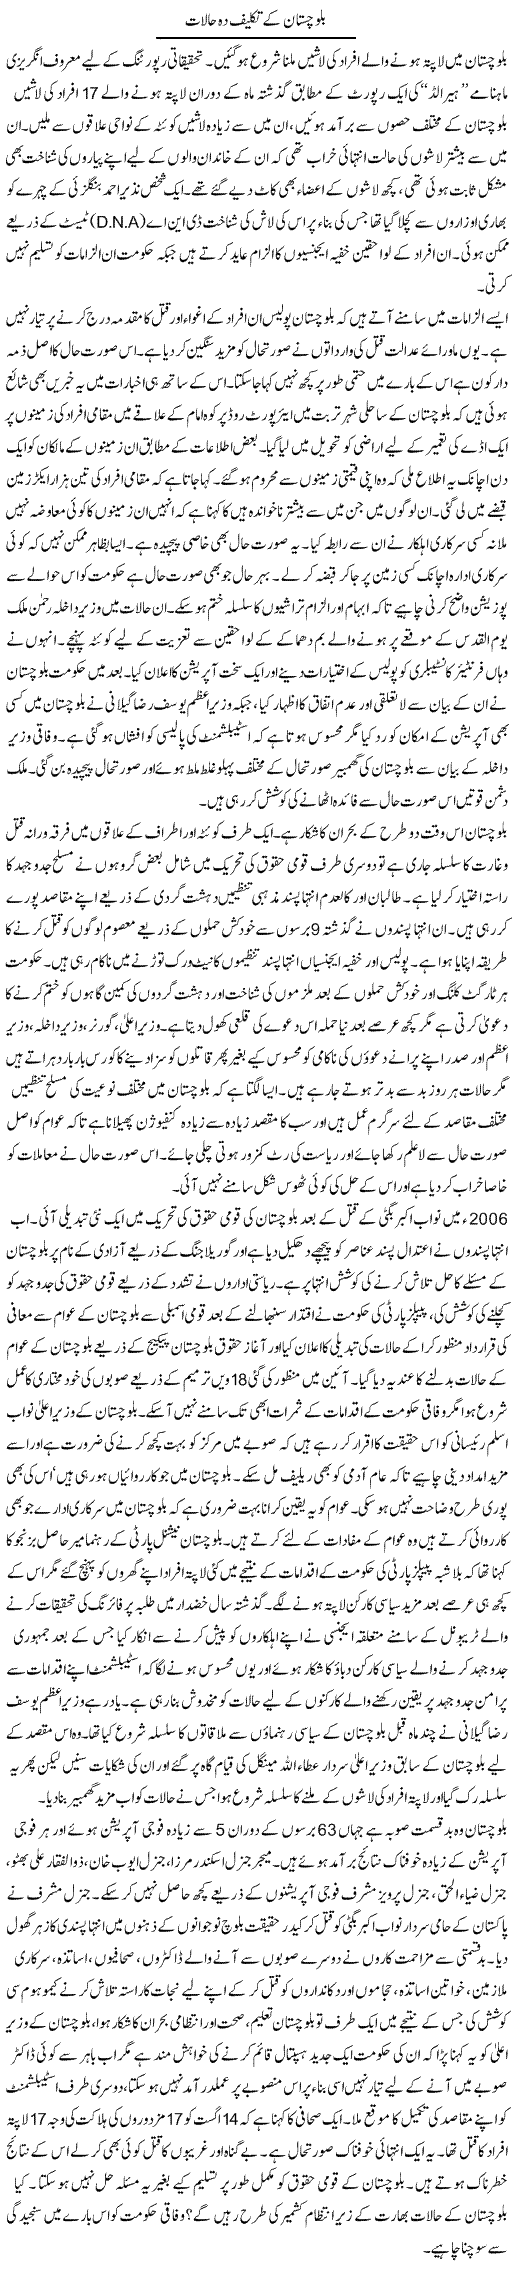 Balochistan Conditions Express Column Tauseef Ahmed 25 September 2010